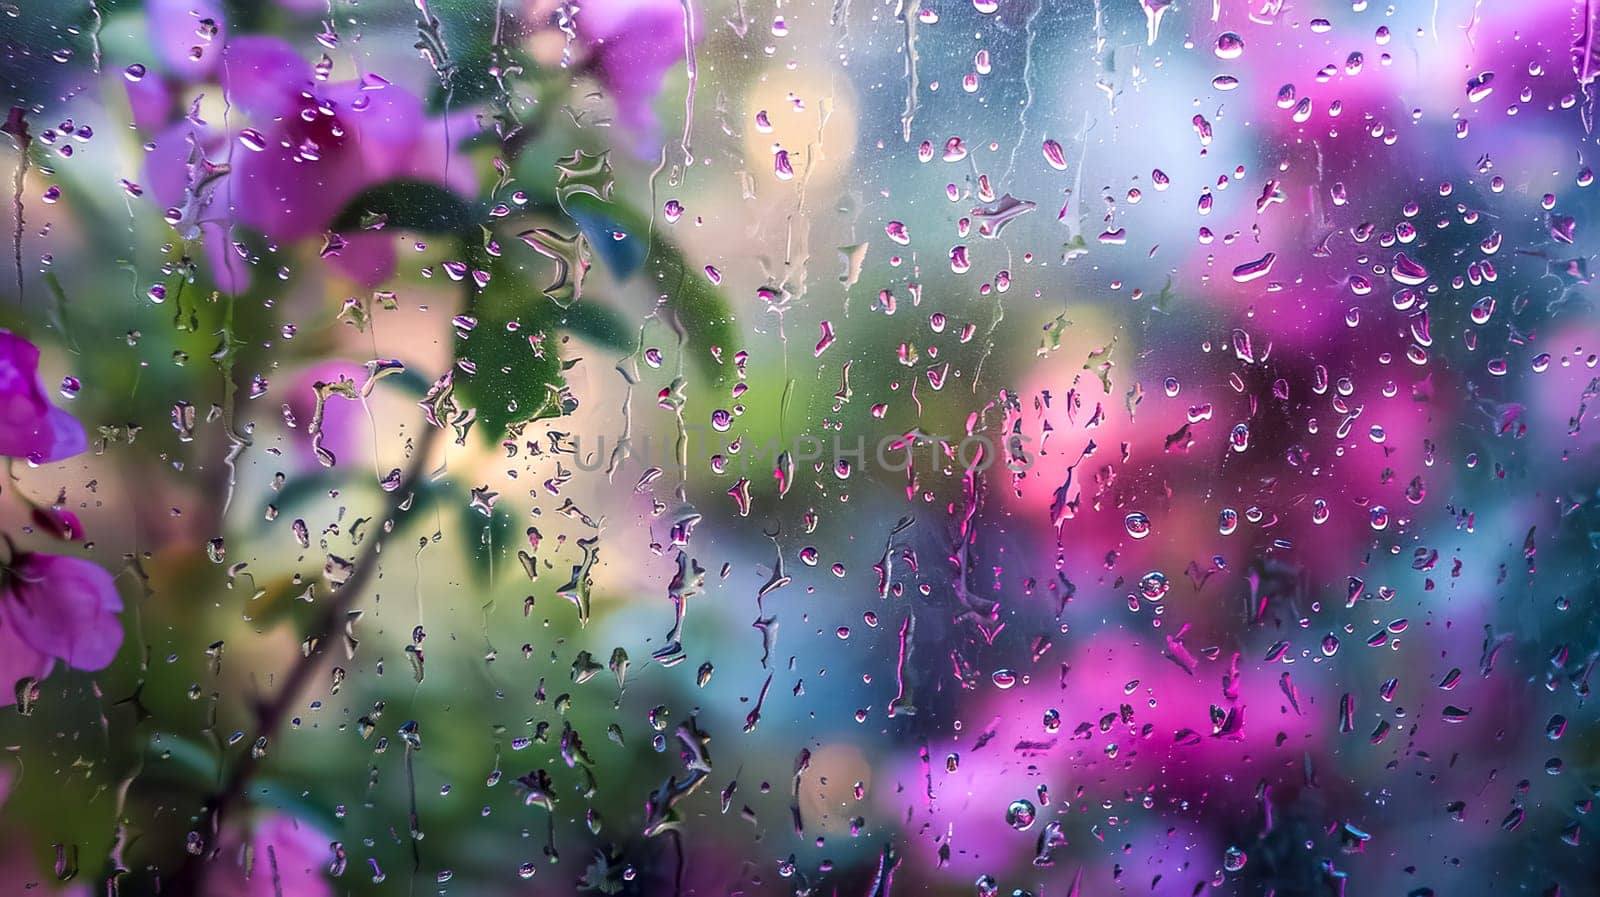 Raindrops on glass with blurred floral background by Edophoto